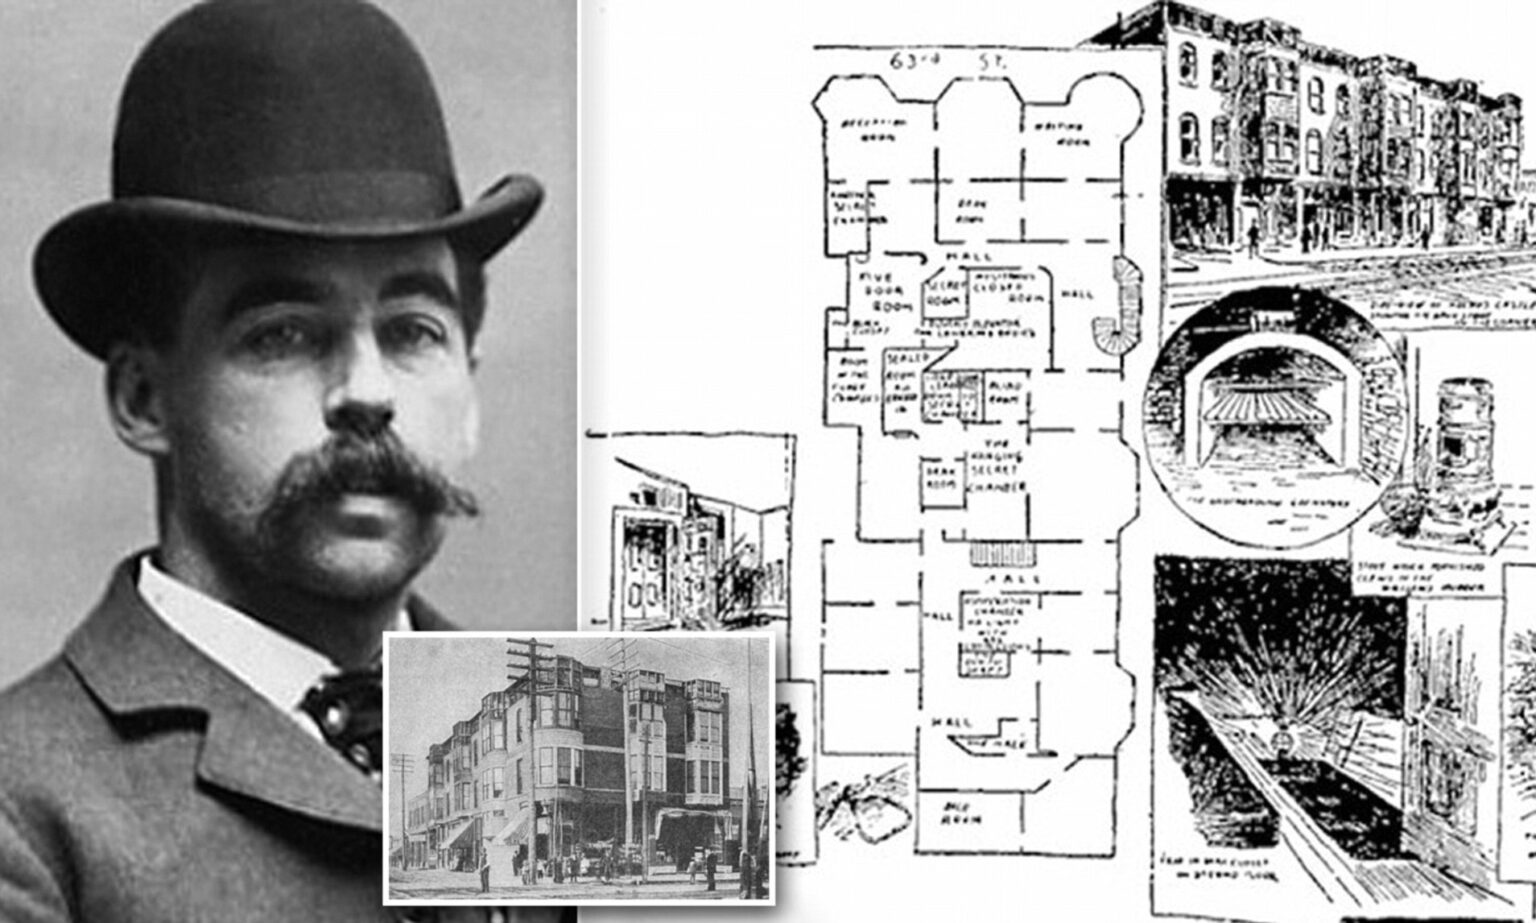 H.H. Holmes has been deemed the first serial killer of the United States, with his insane murder hotel he used to lure victims. Here's what we know.